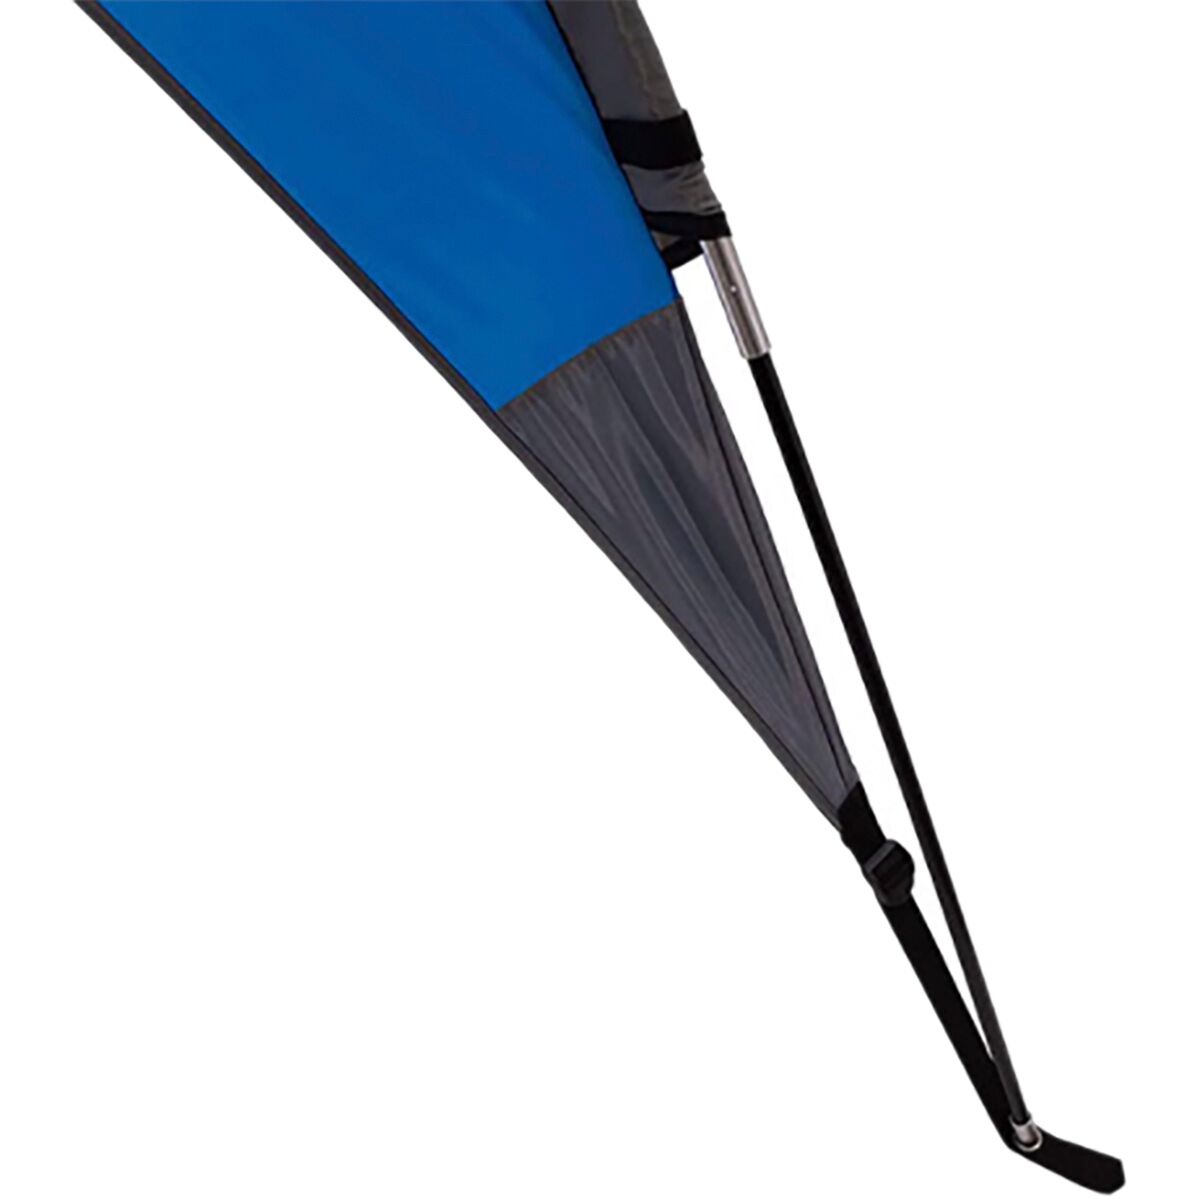 ALPS Mountaineering Tri-Awning